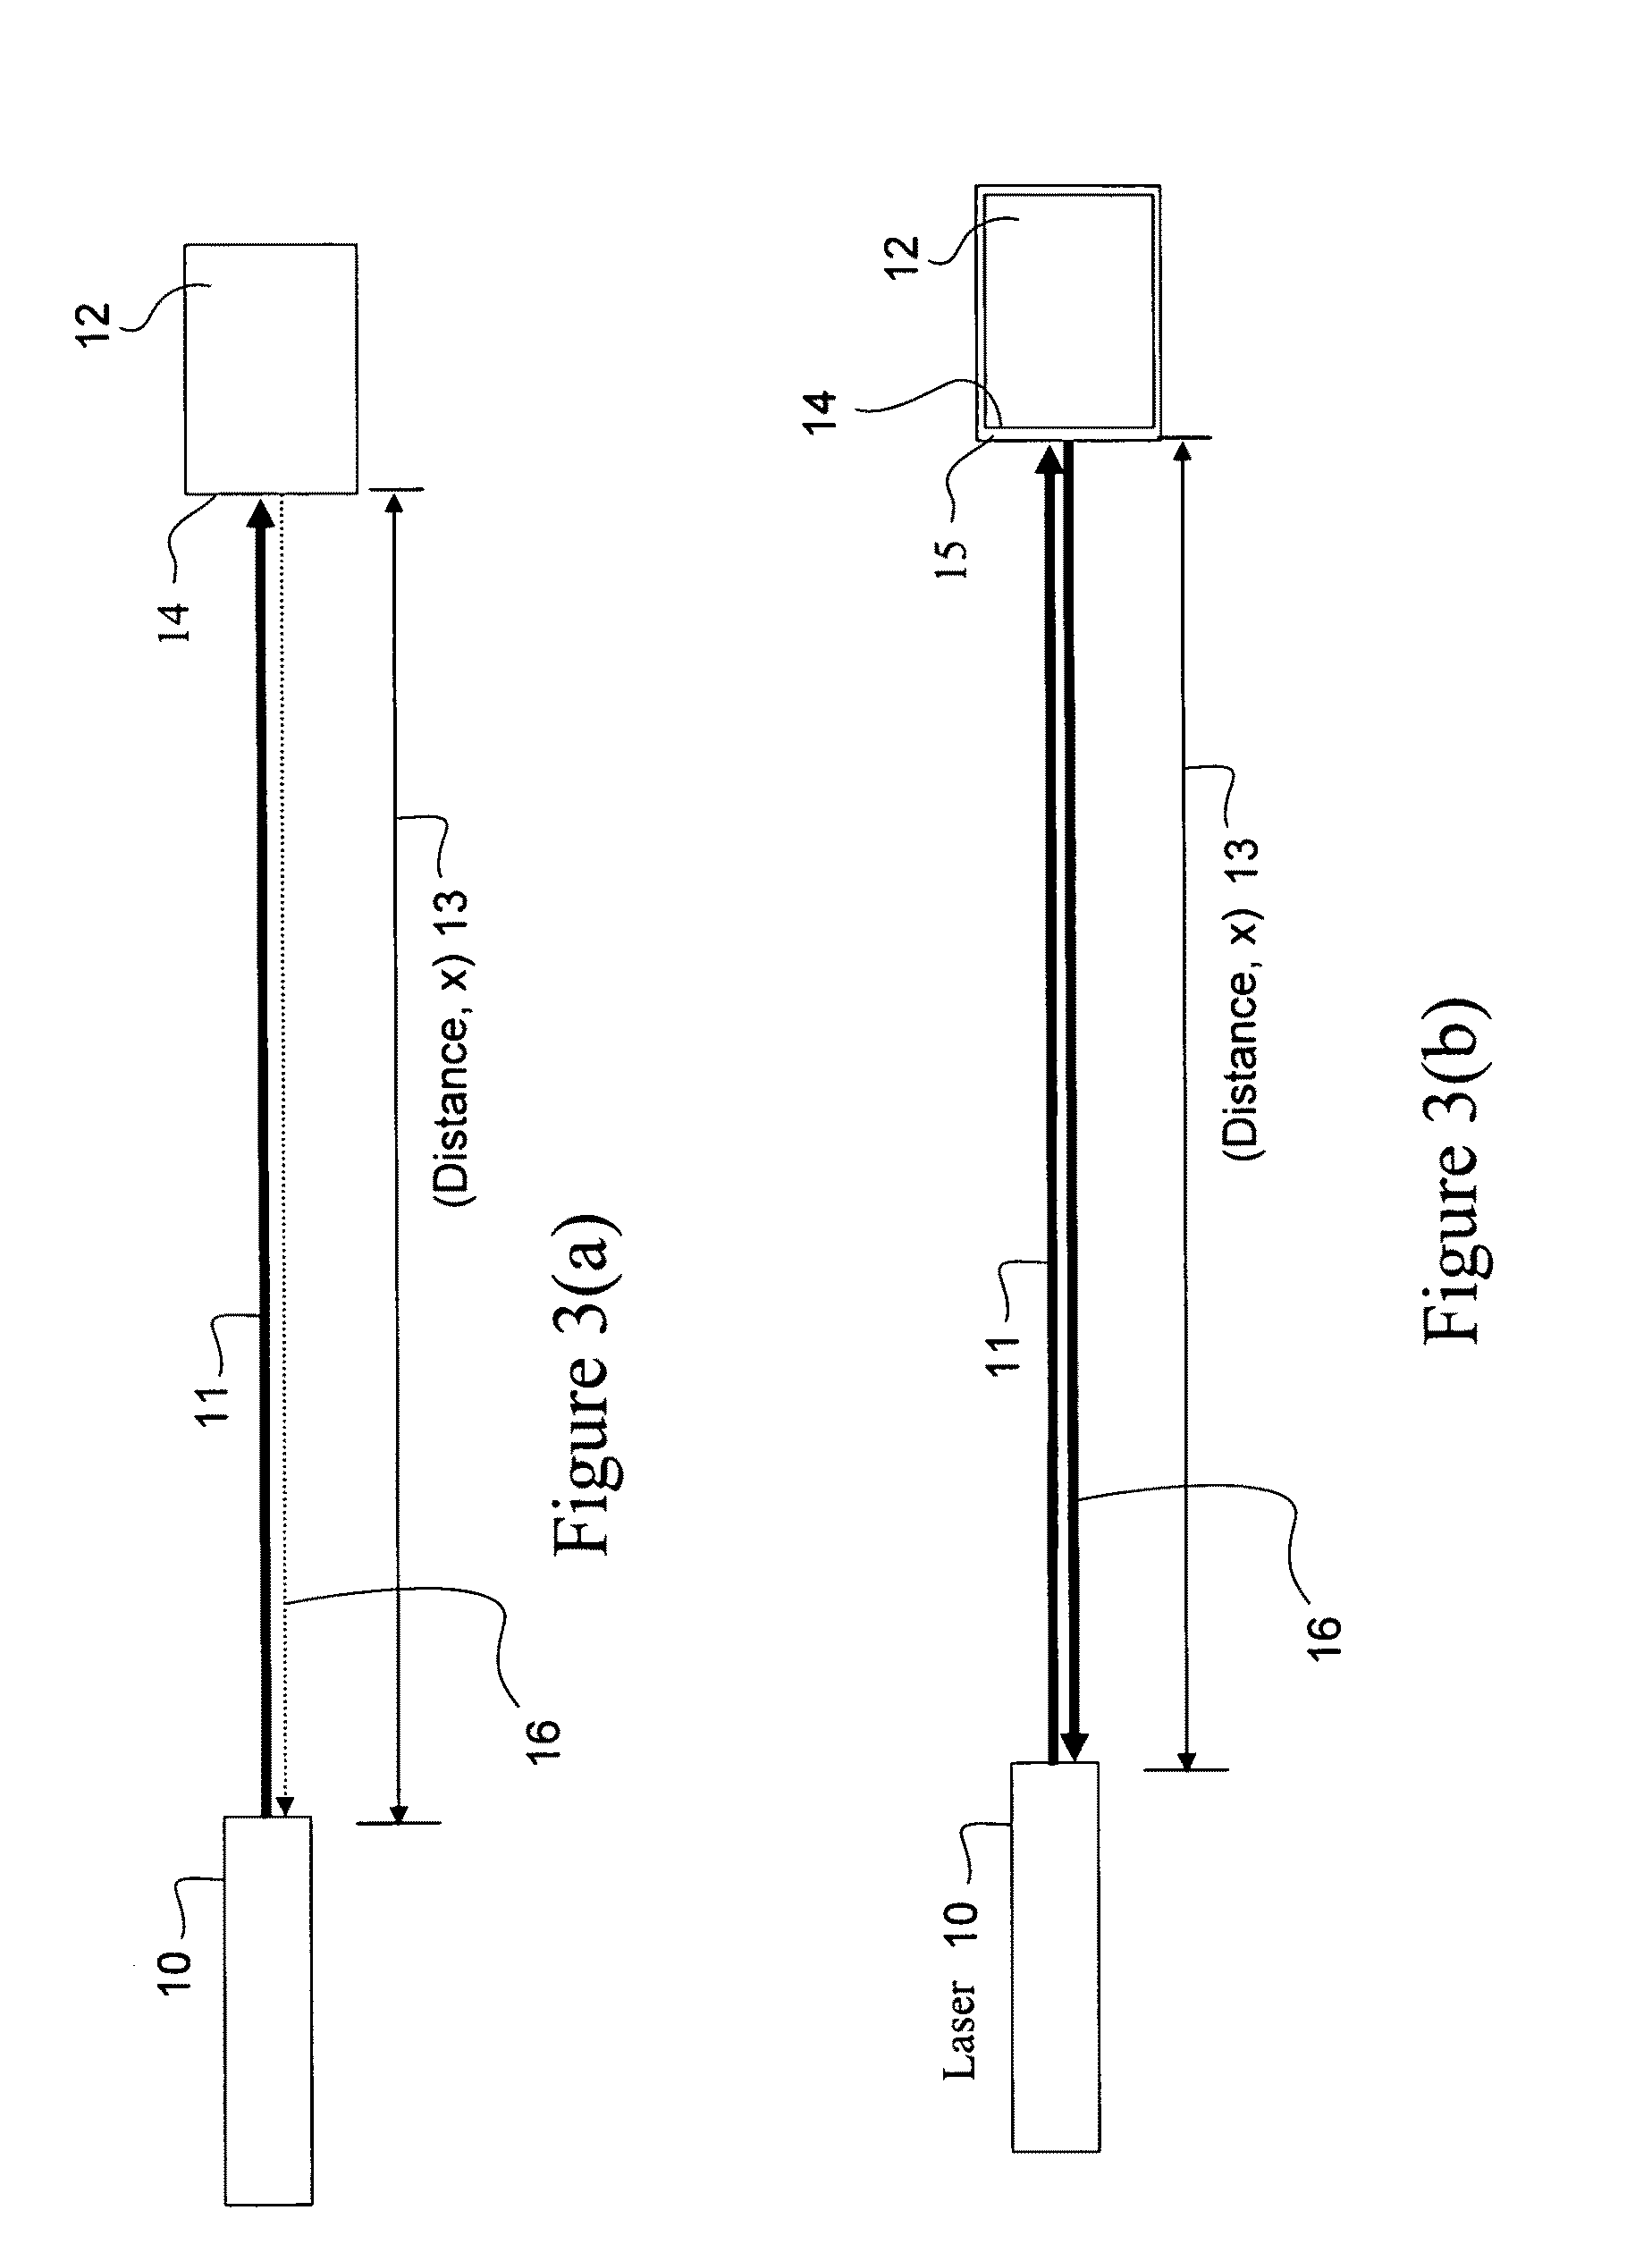 Method of reflecting impinging electromagnetic radiation and limiting heating caused by absorbed electromagnetic radiation using engineered surfaces on macro-scale objects